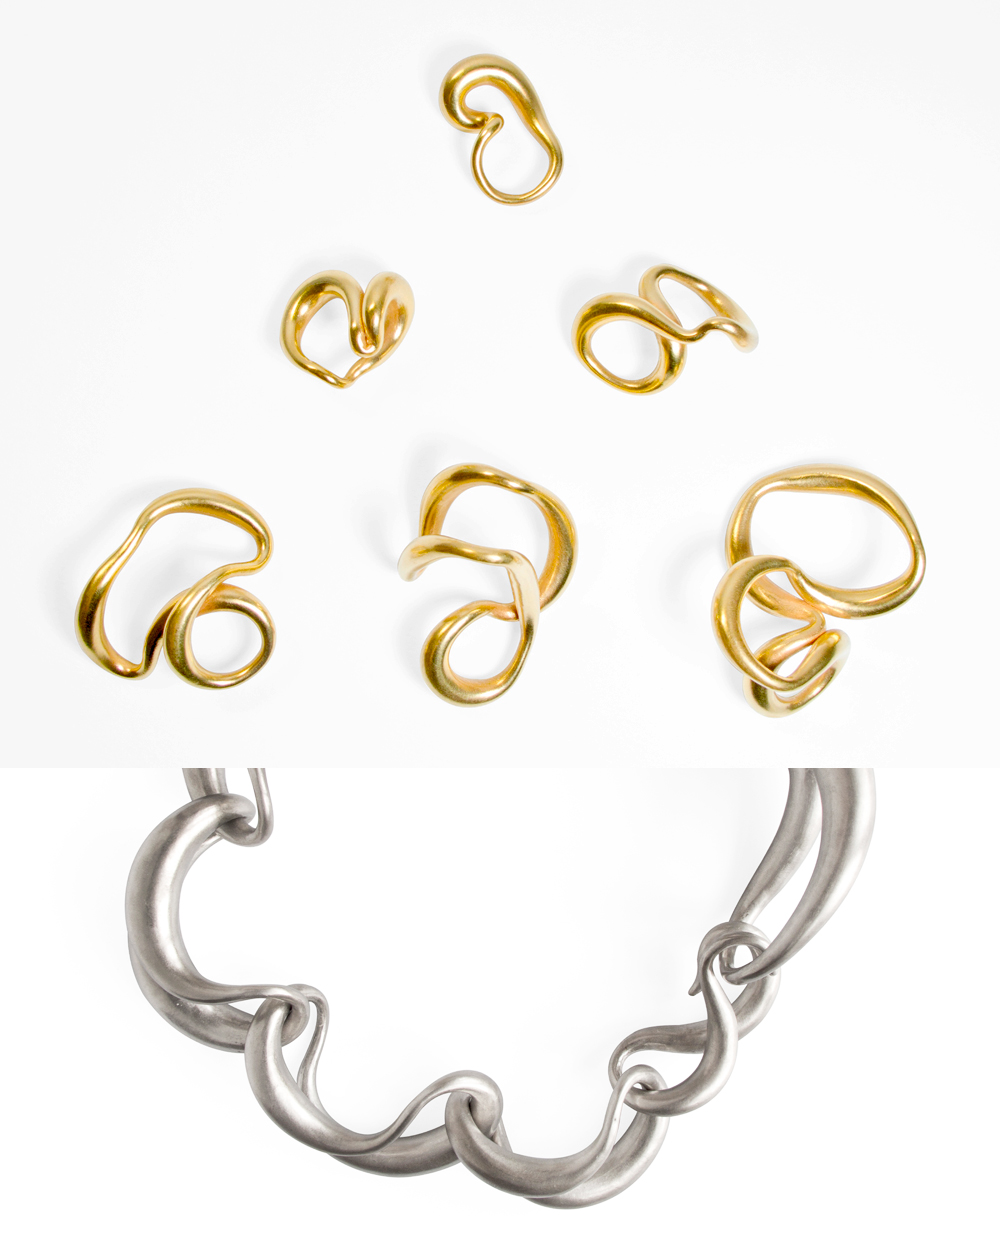 Noon Passama Formal Research - A necklace, 2015 / Formal Research - H rings, 2015 Rigid clay, silver, gold for the Exhibition TO RECOVER [courtesy of KLIMT02]